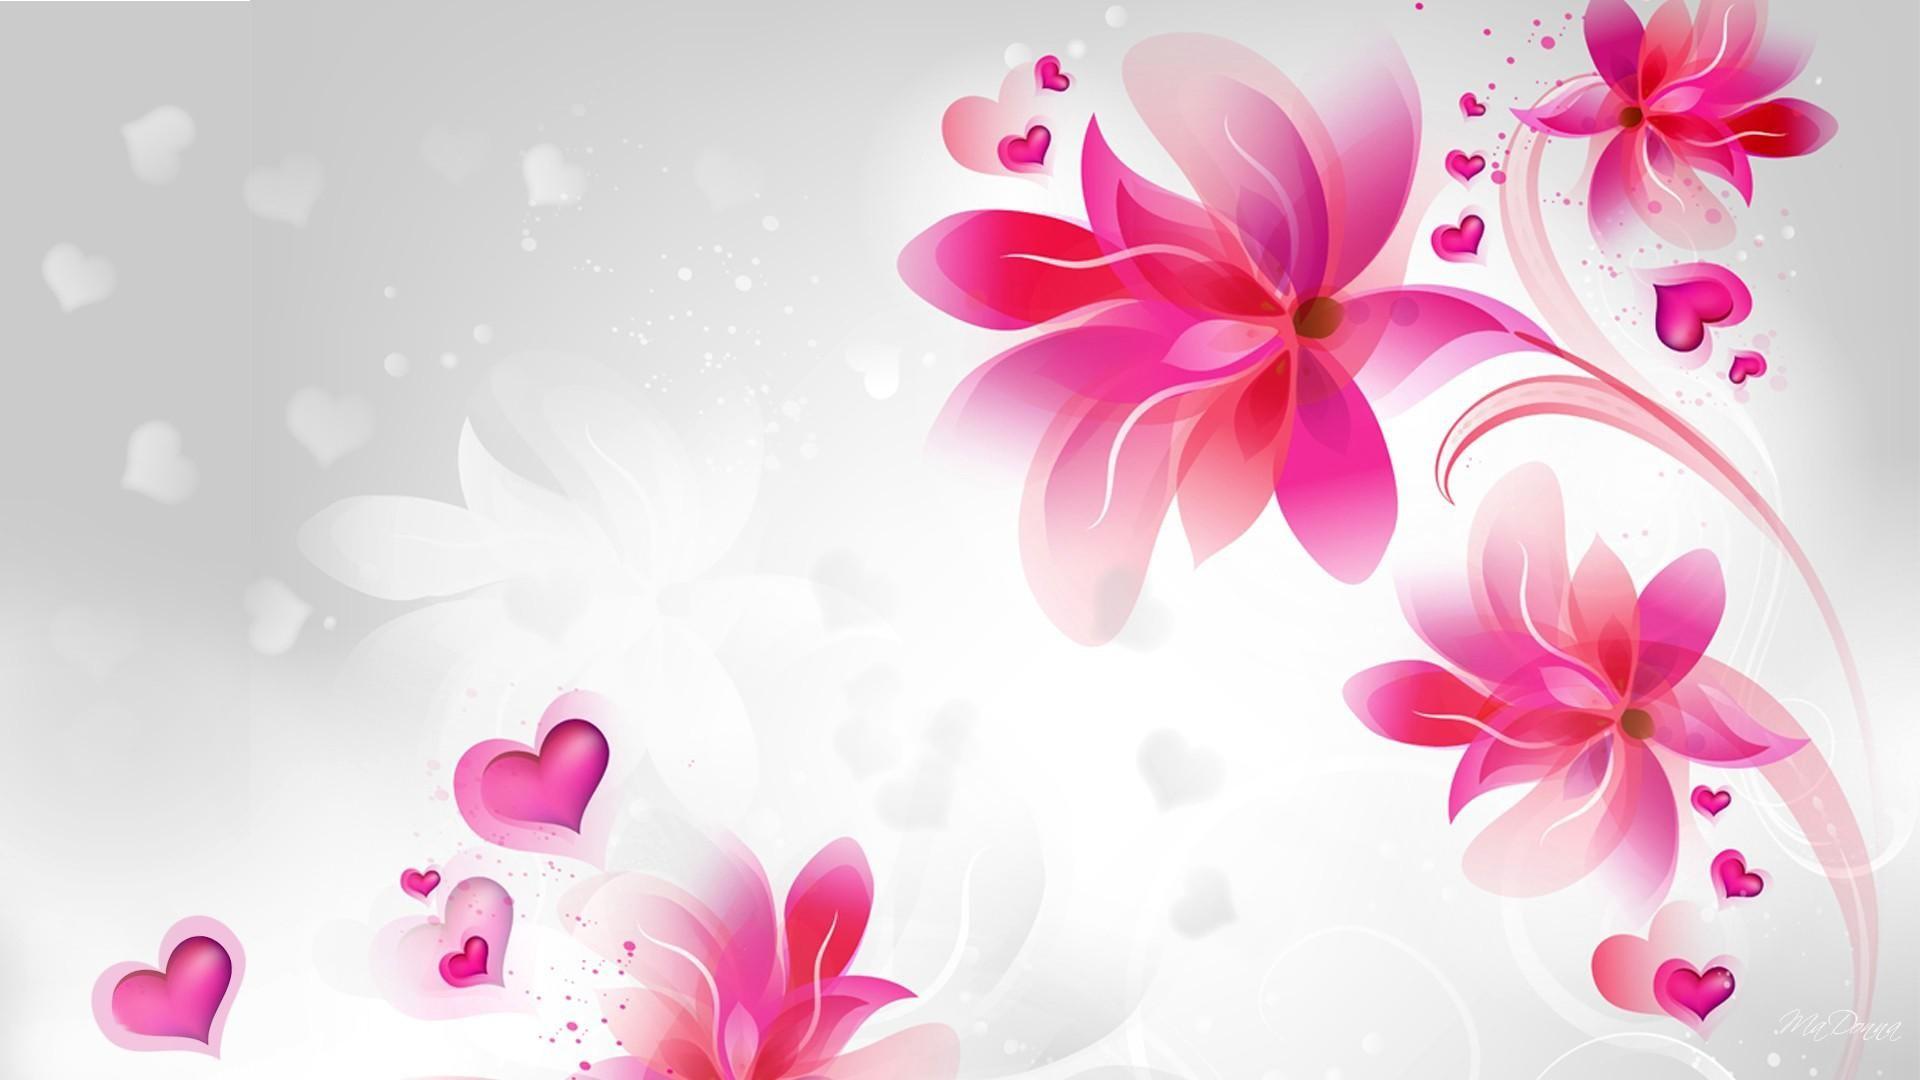 Abstract Flowers Wallpaper (66+ images)